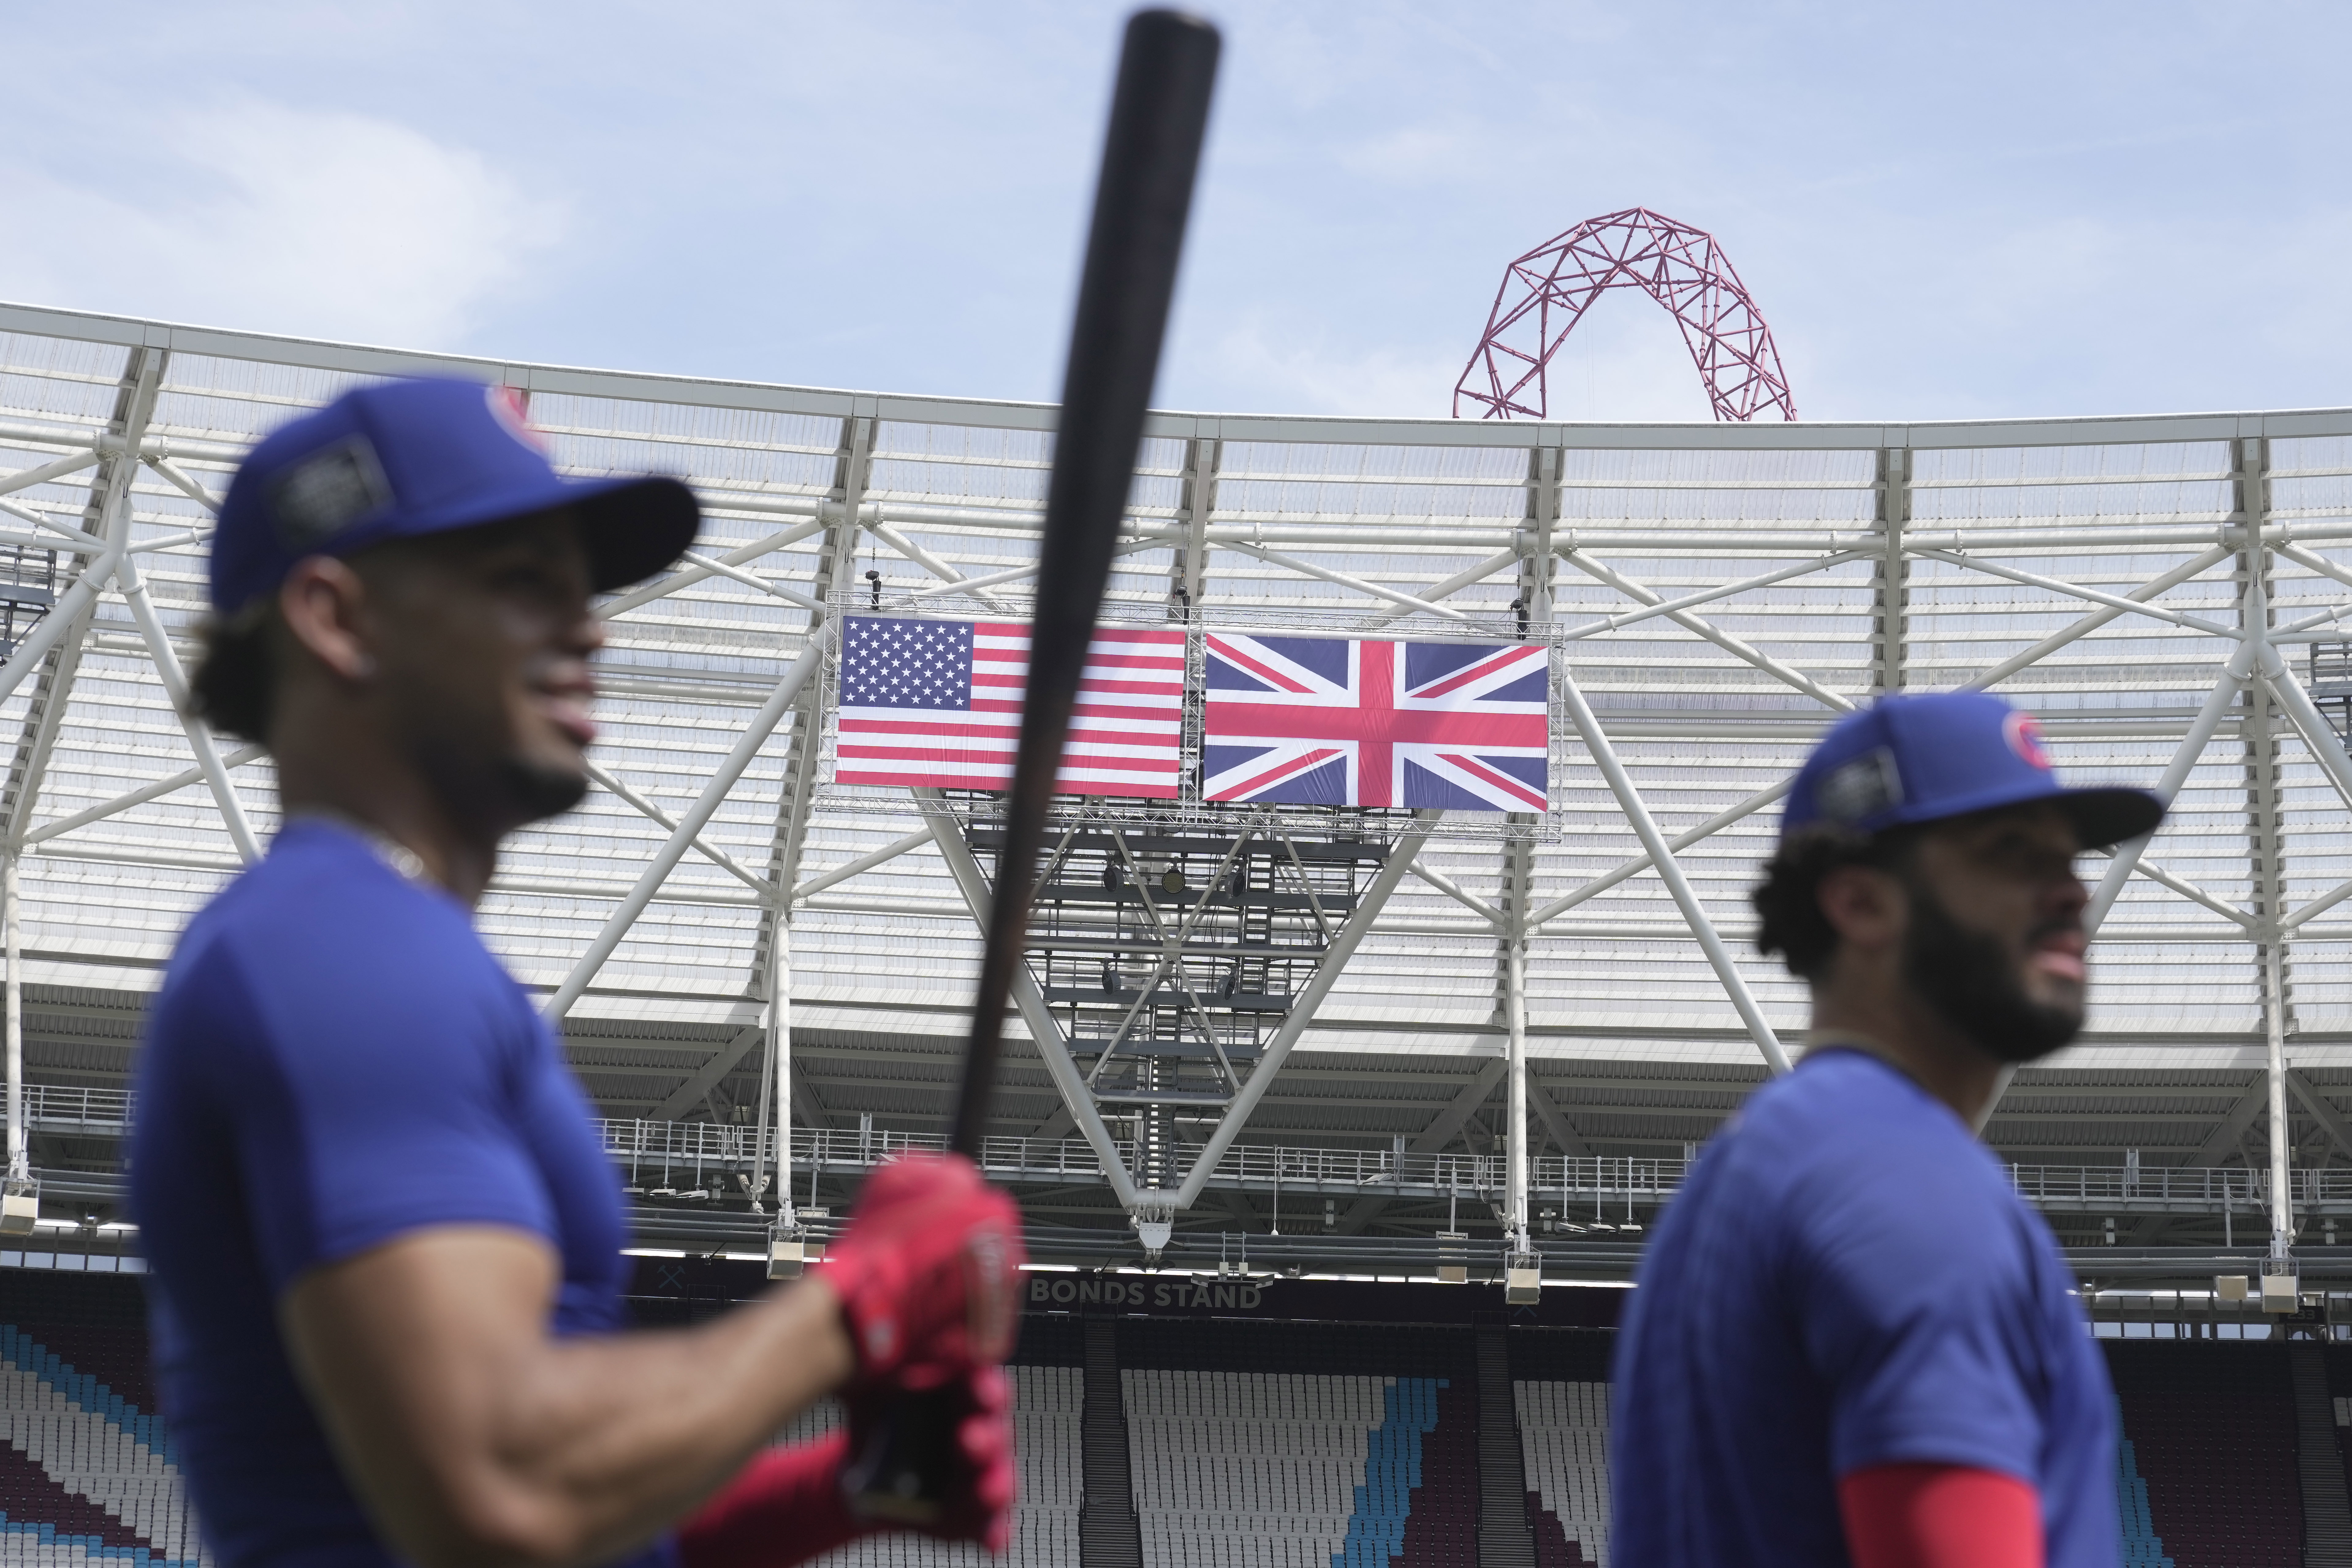 MLB News: Cardinals vs Cubs in London: What time is the match in the US?